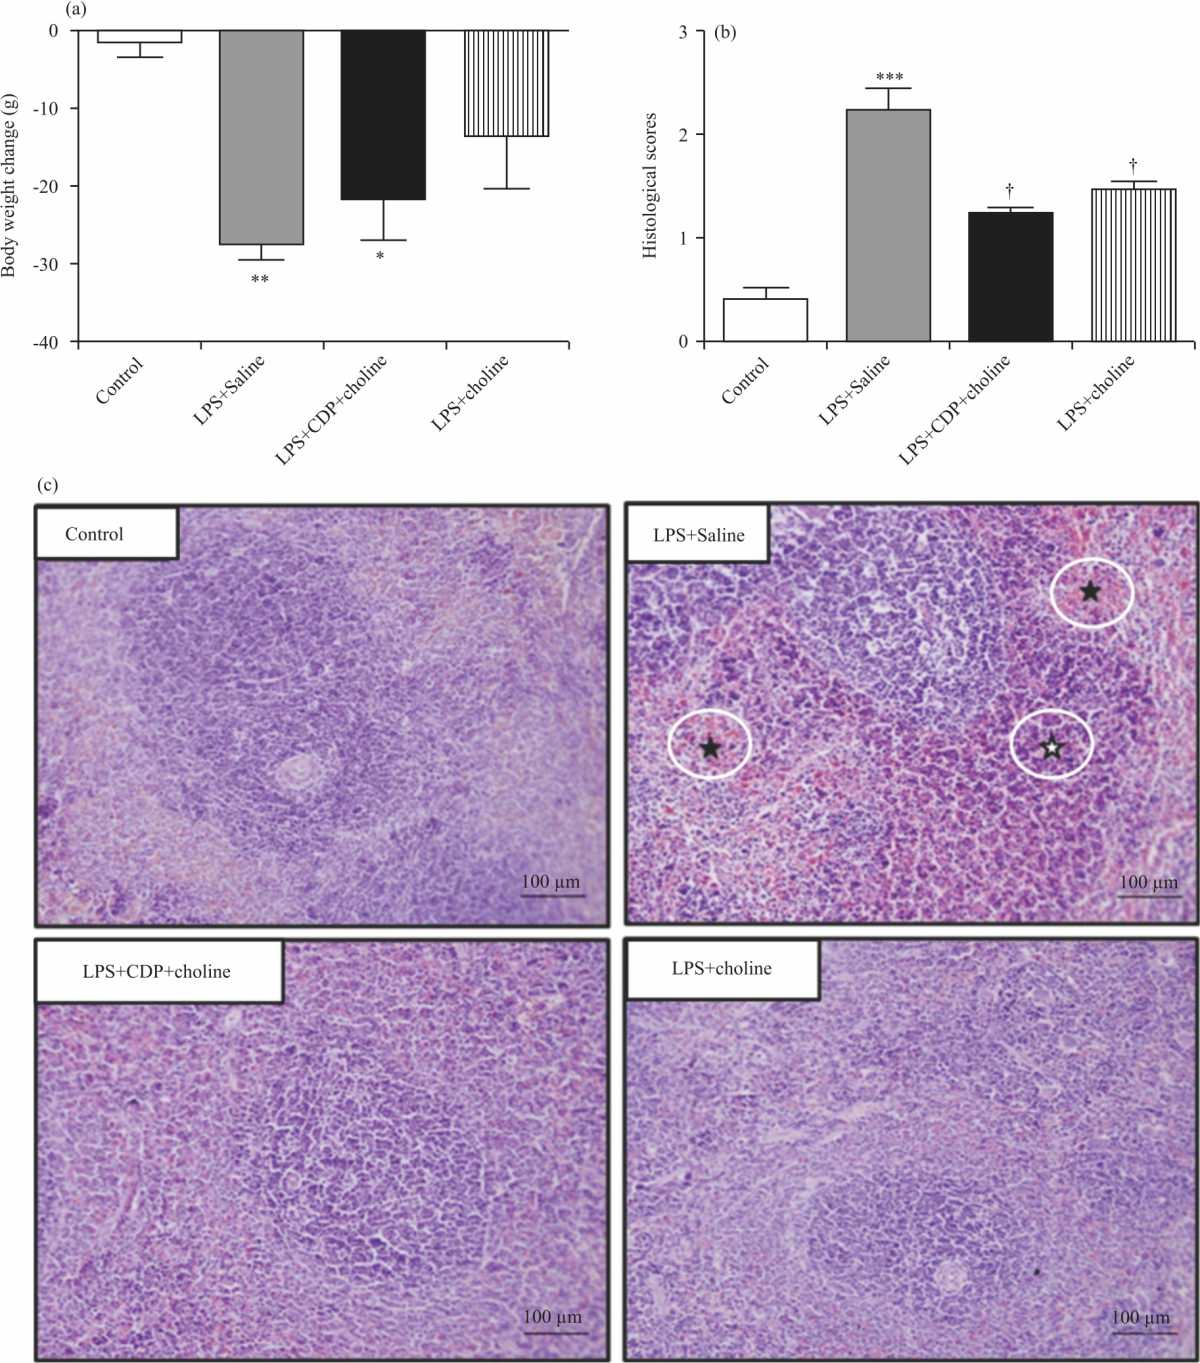 Image for - Effects of CDP-Choline and Choline on COX Pathway in LPS-Induced Inflammatory Response in Rats